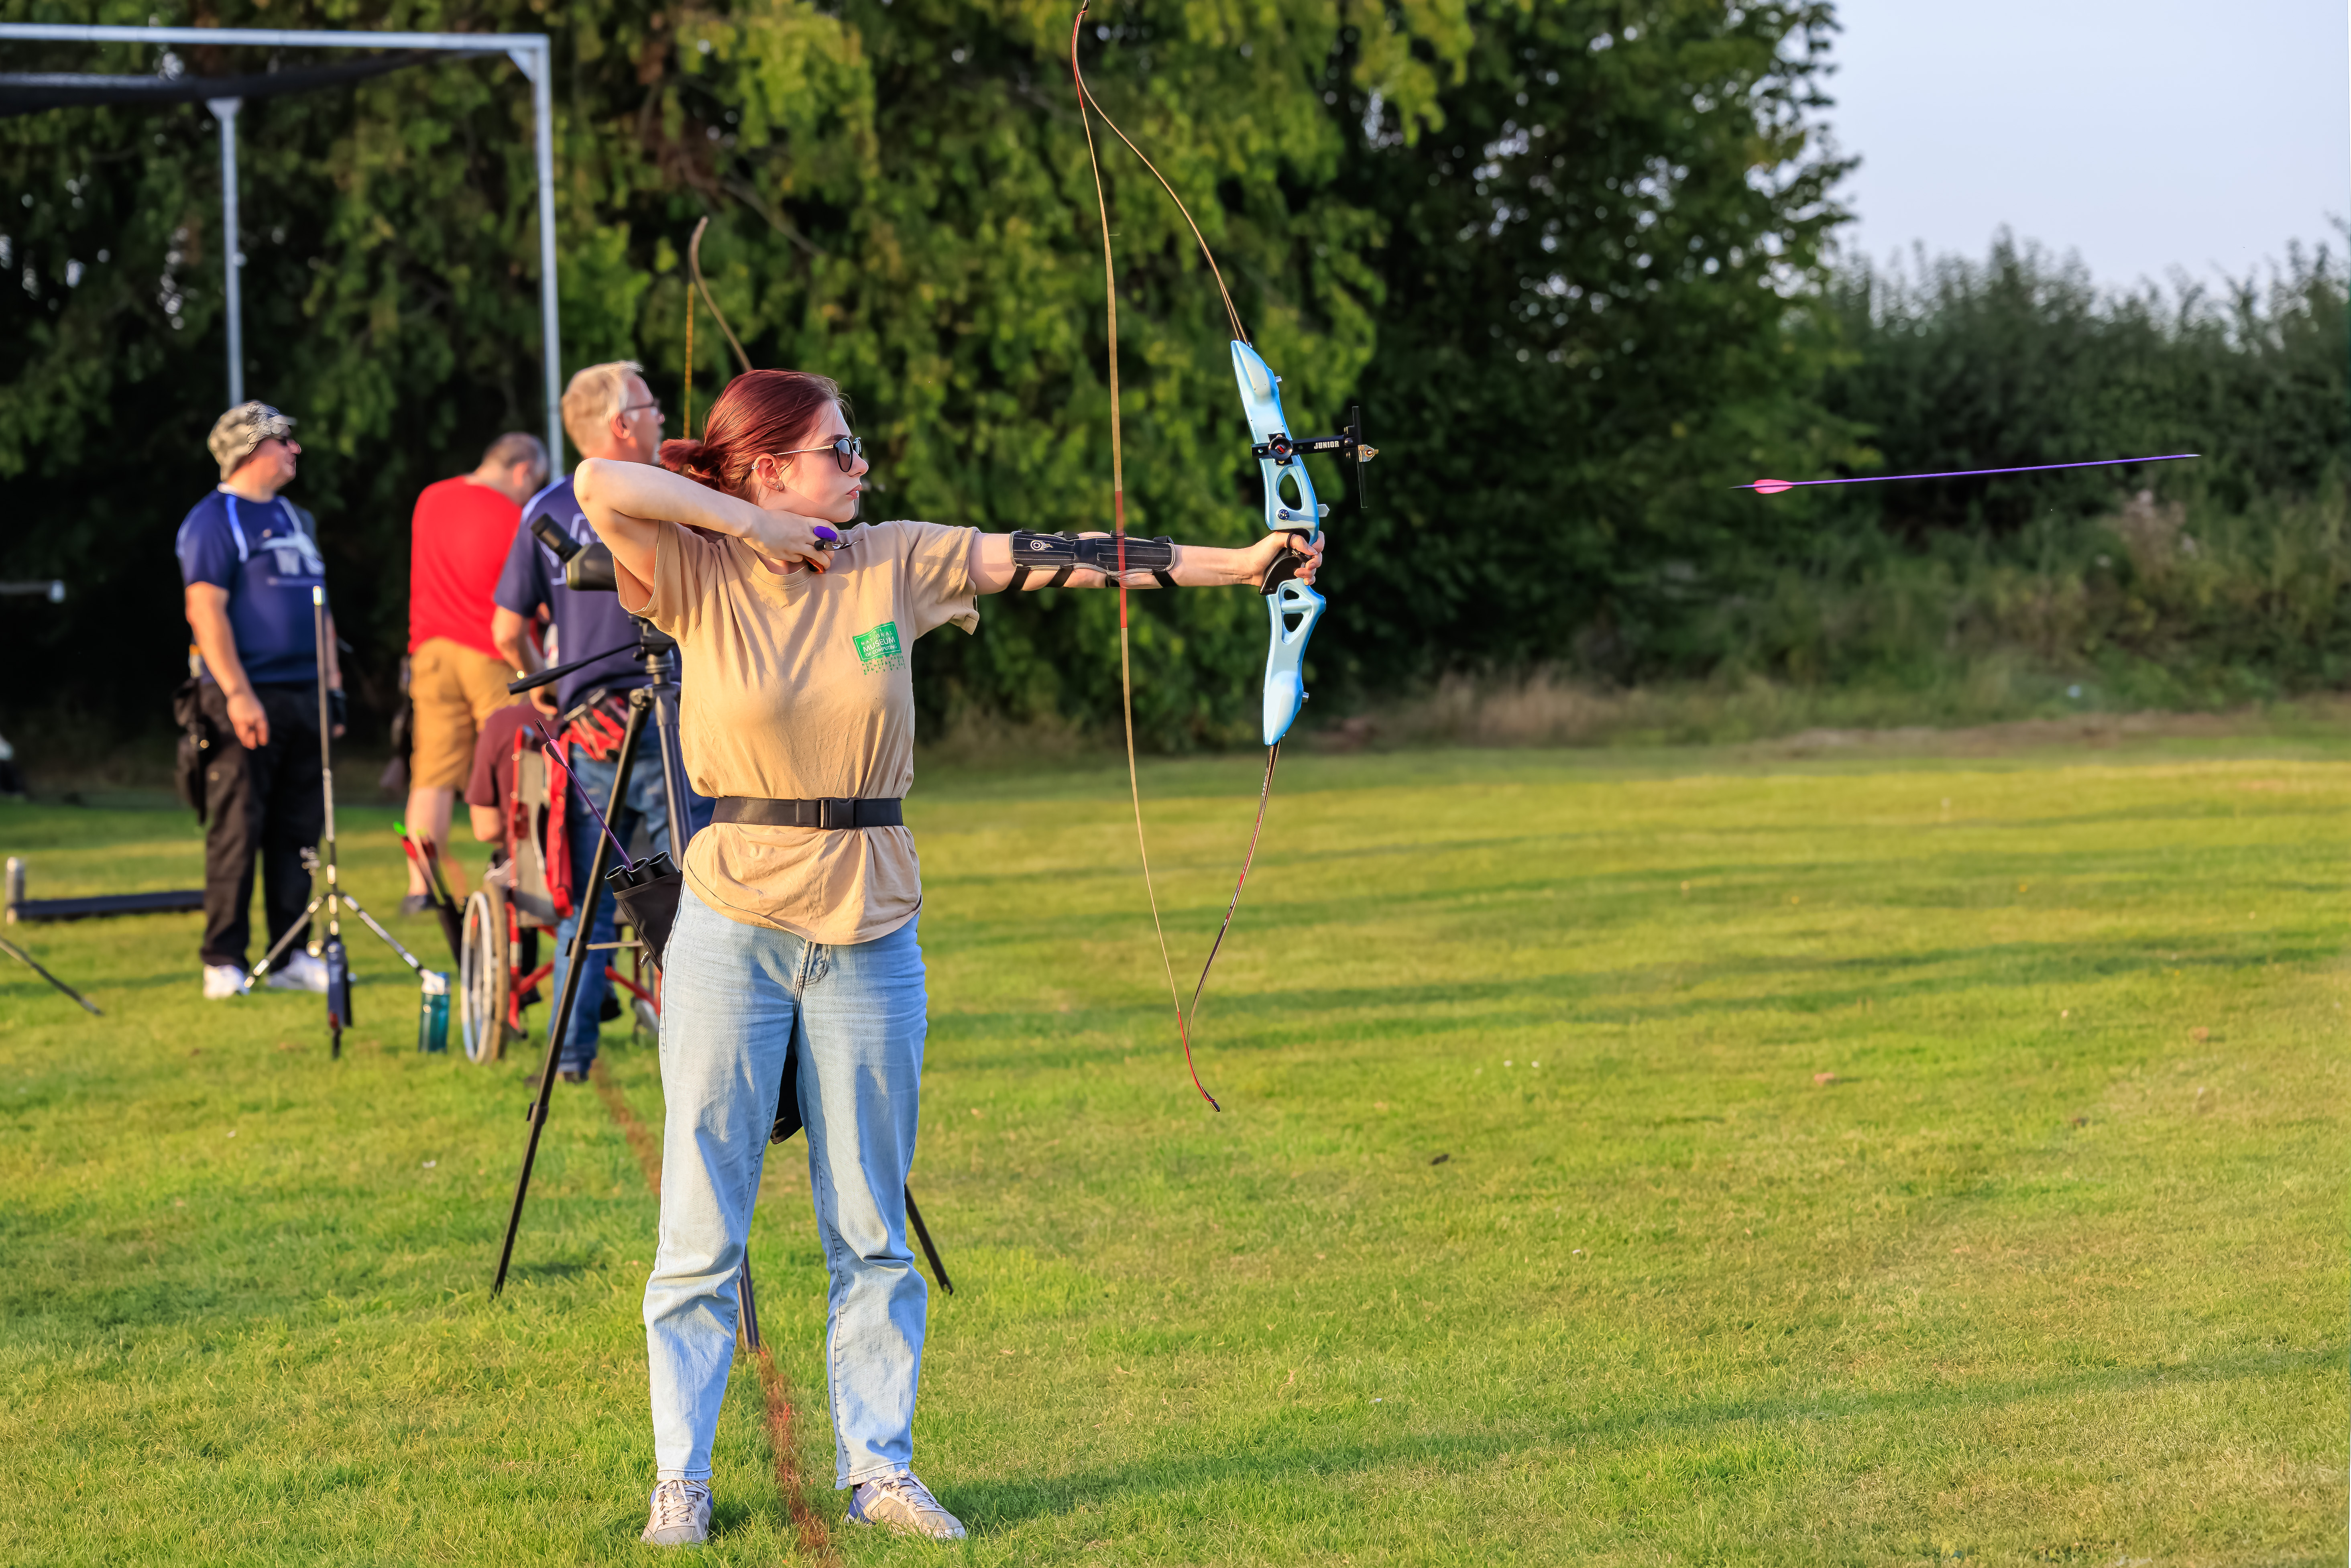 Archers on shooting line, young lady in foreground with auburn hair, sunglasses on has just released and arrow caught in flight after just leaving bow.